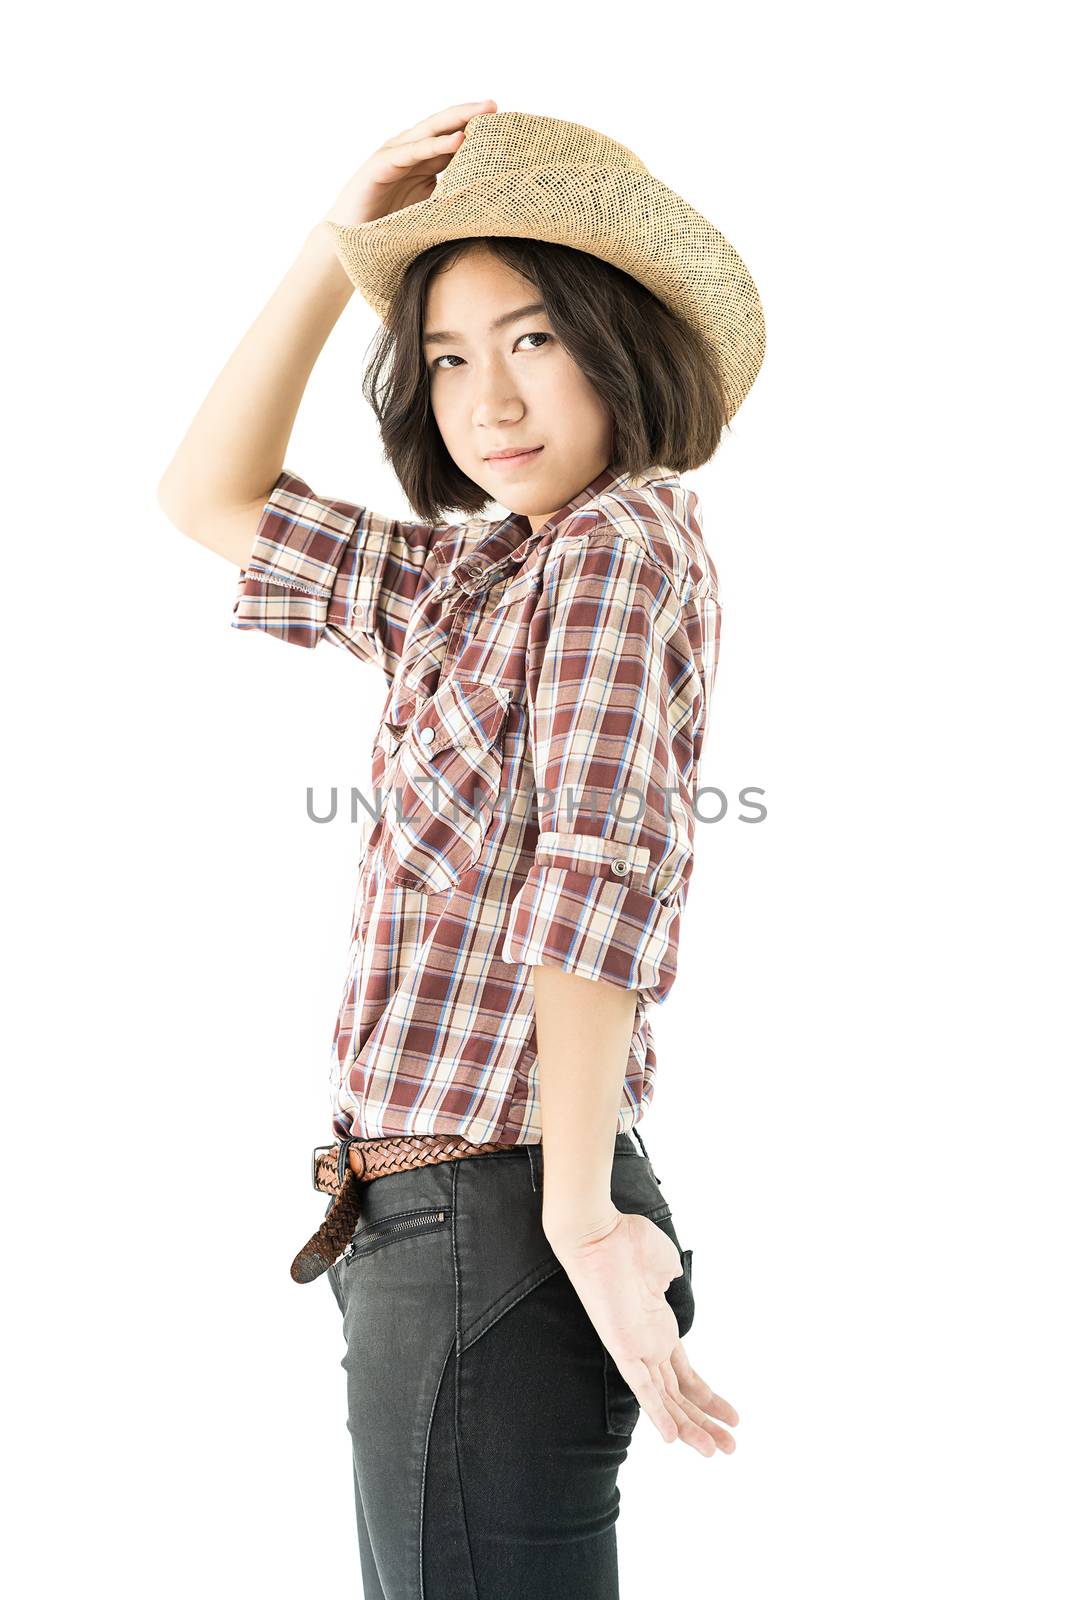 Young woman in a cowboy hat and plaid shirt with hand on her hat by stoonn